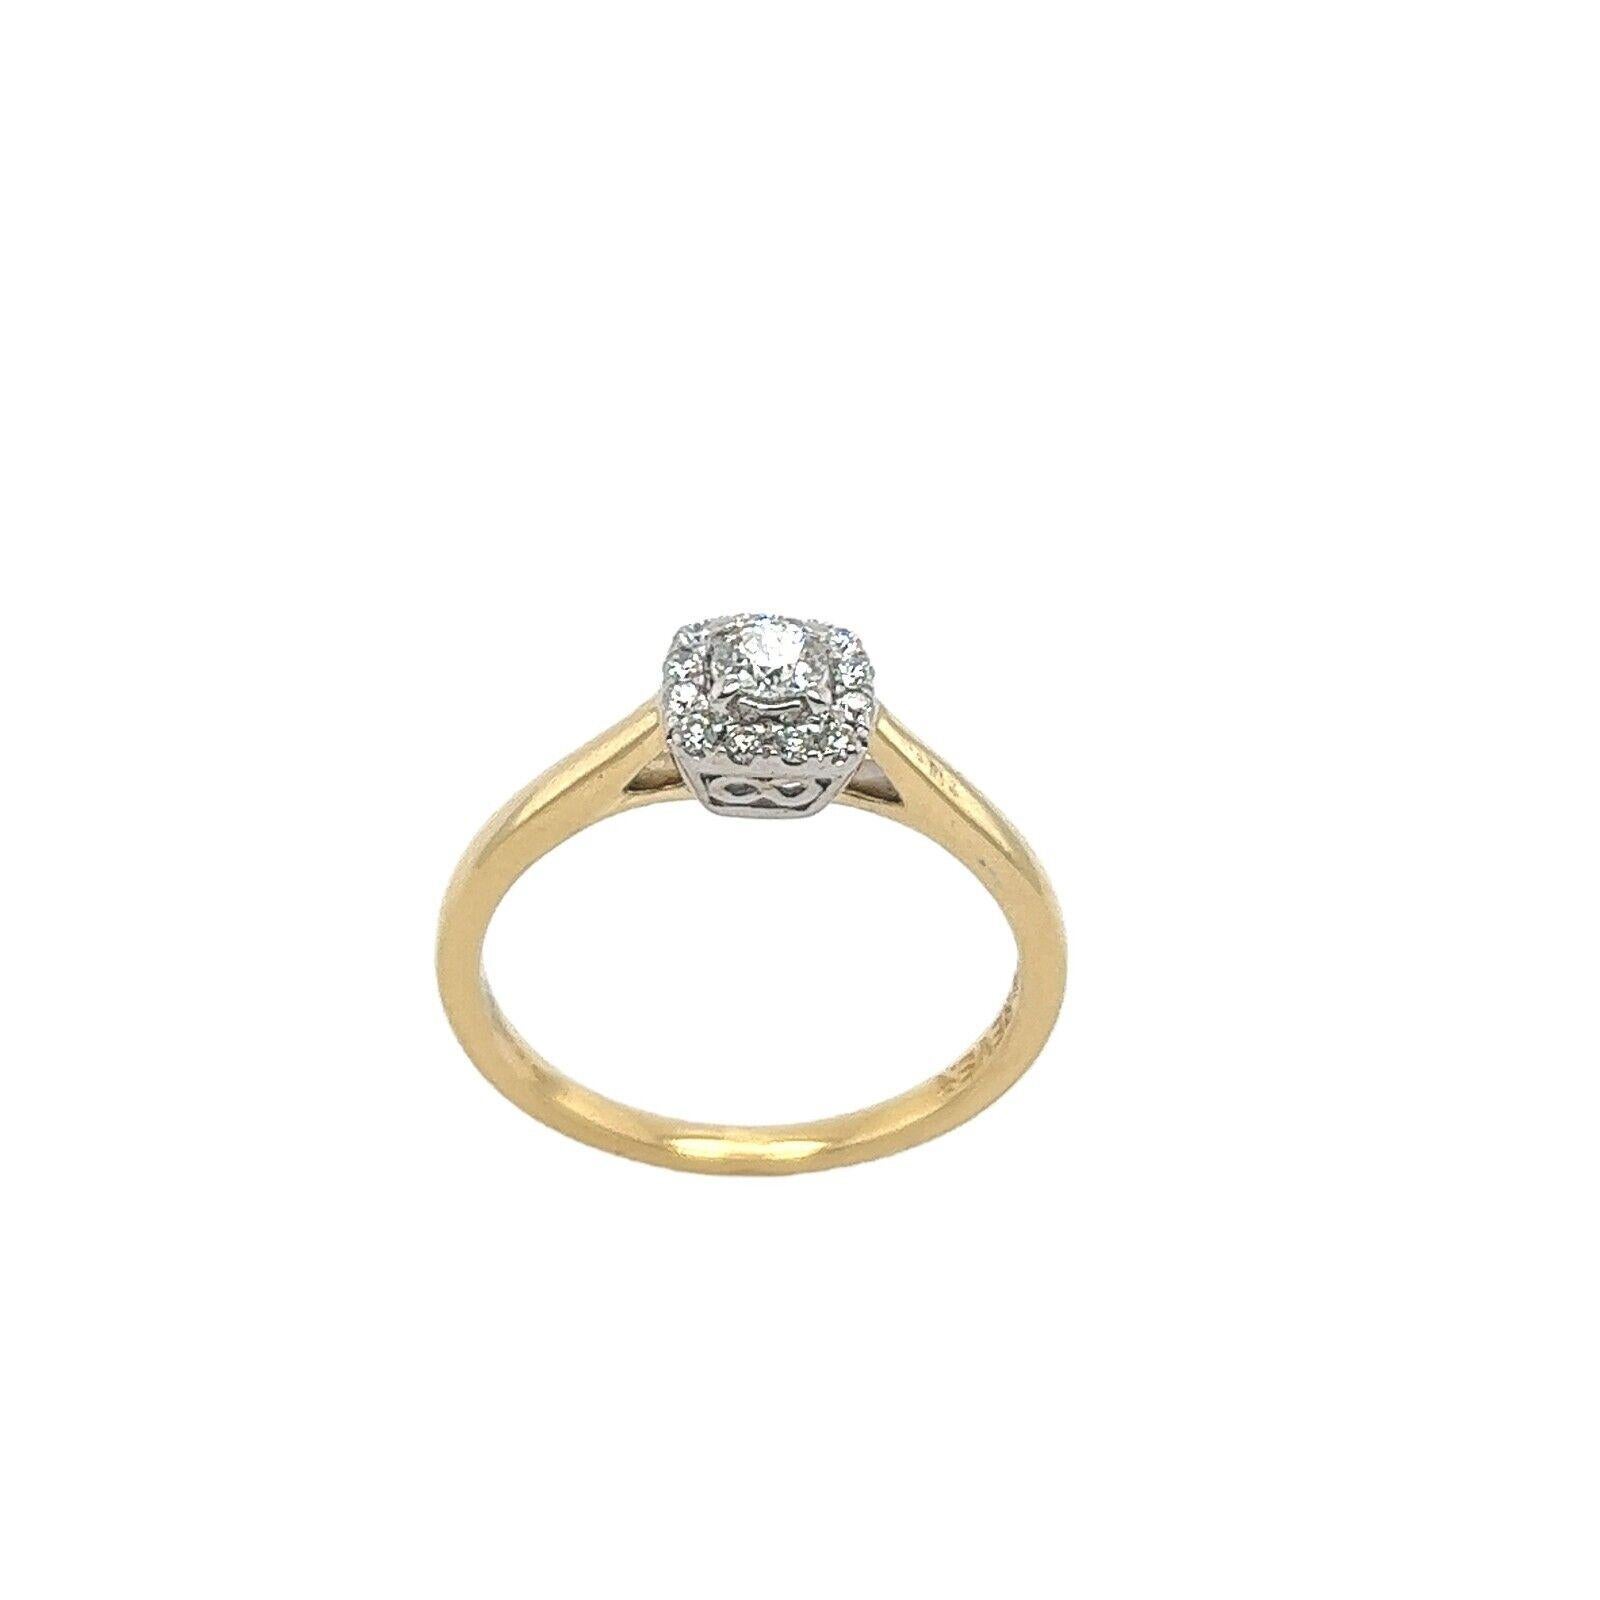 This gorgeous Diamond ring set in an 18ct Yellow & White Gold setting.  with 0.25ct natural round brilliant cut Diamonds in a halo setting. This is a unique and eye-catching ring, with inside engraving 